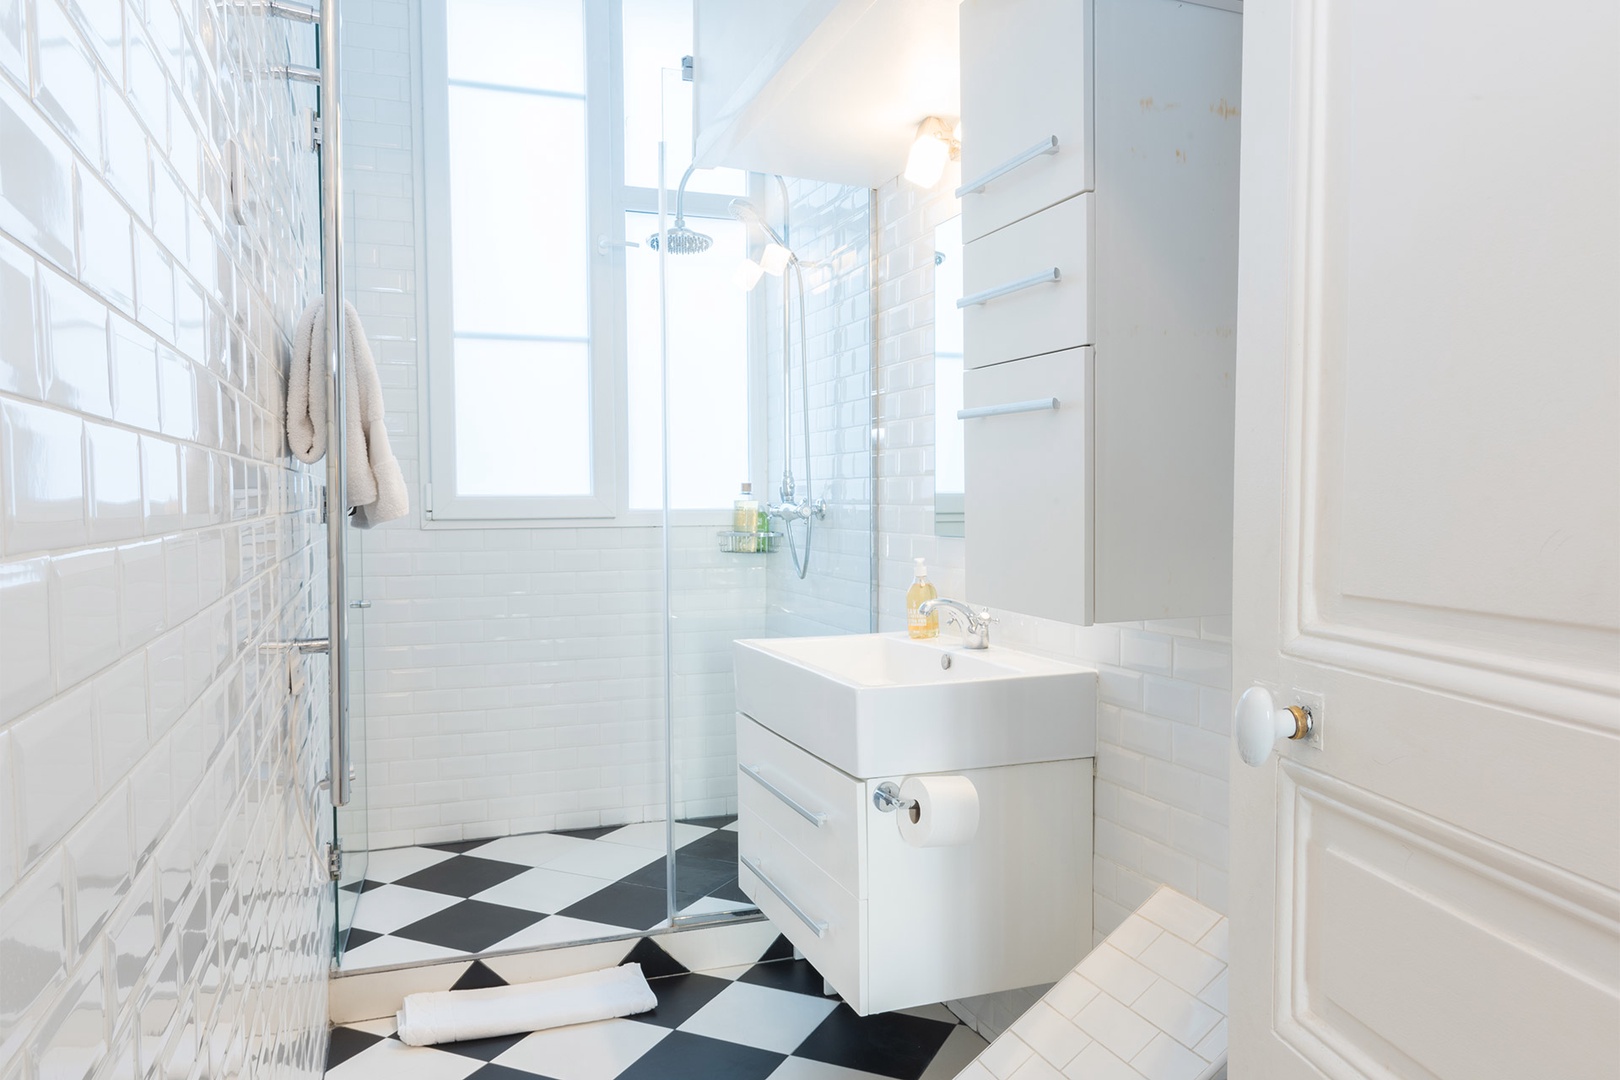 Start your day with a shower in this lovely and bright bathroom!